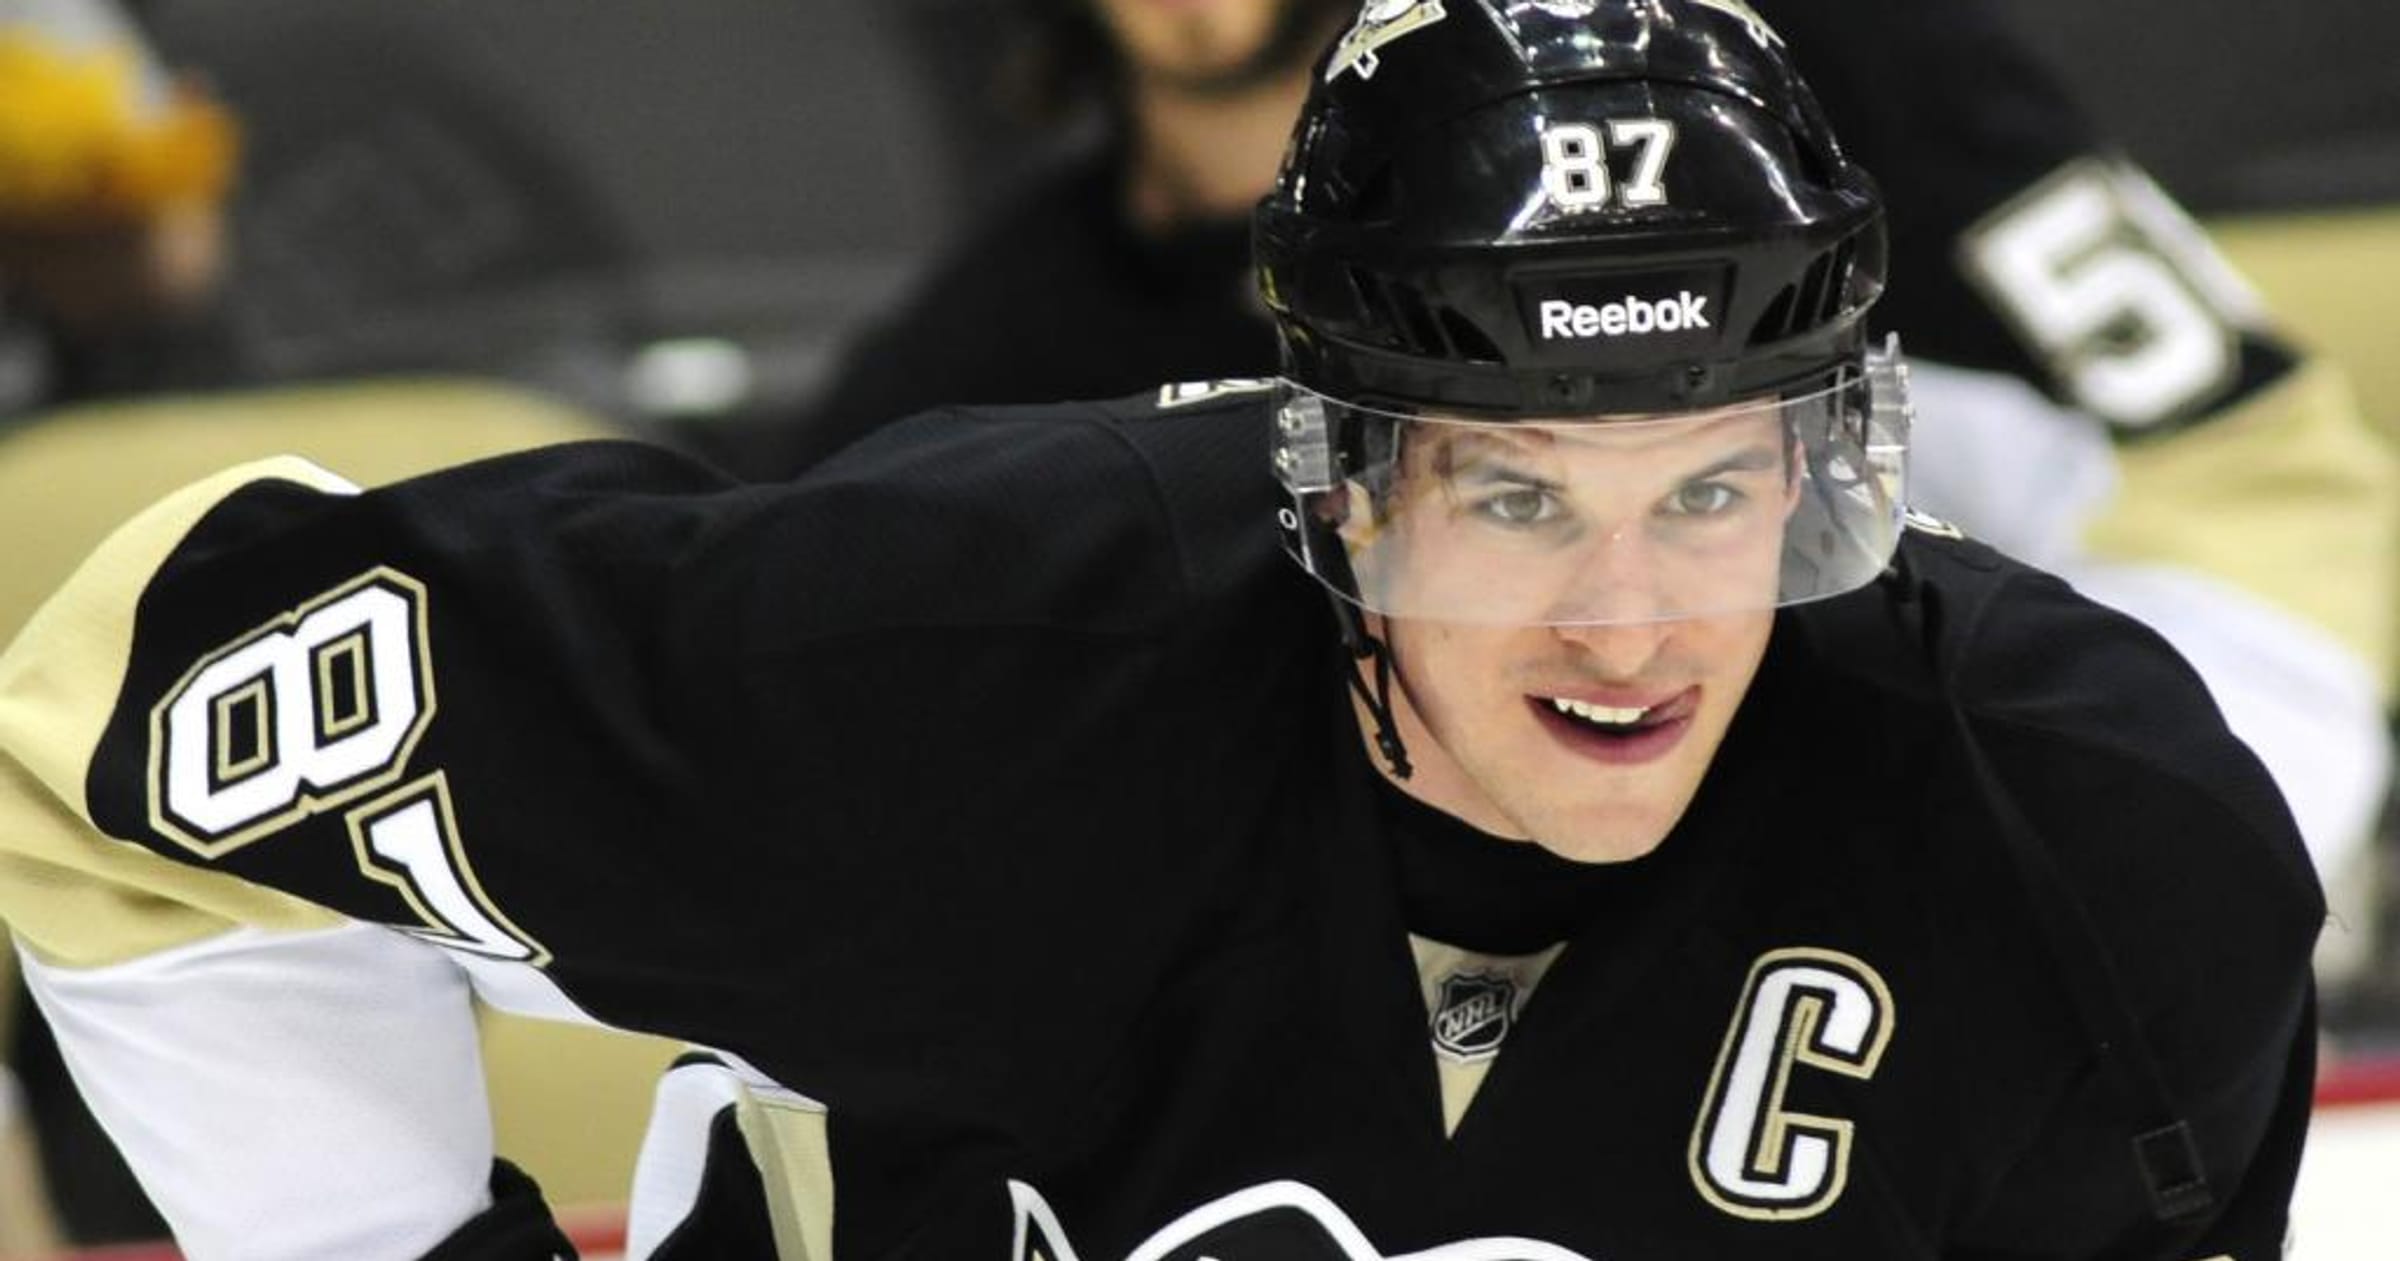 Ranking the top 20 hottest hockey players in the world right now